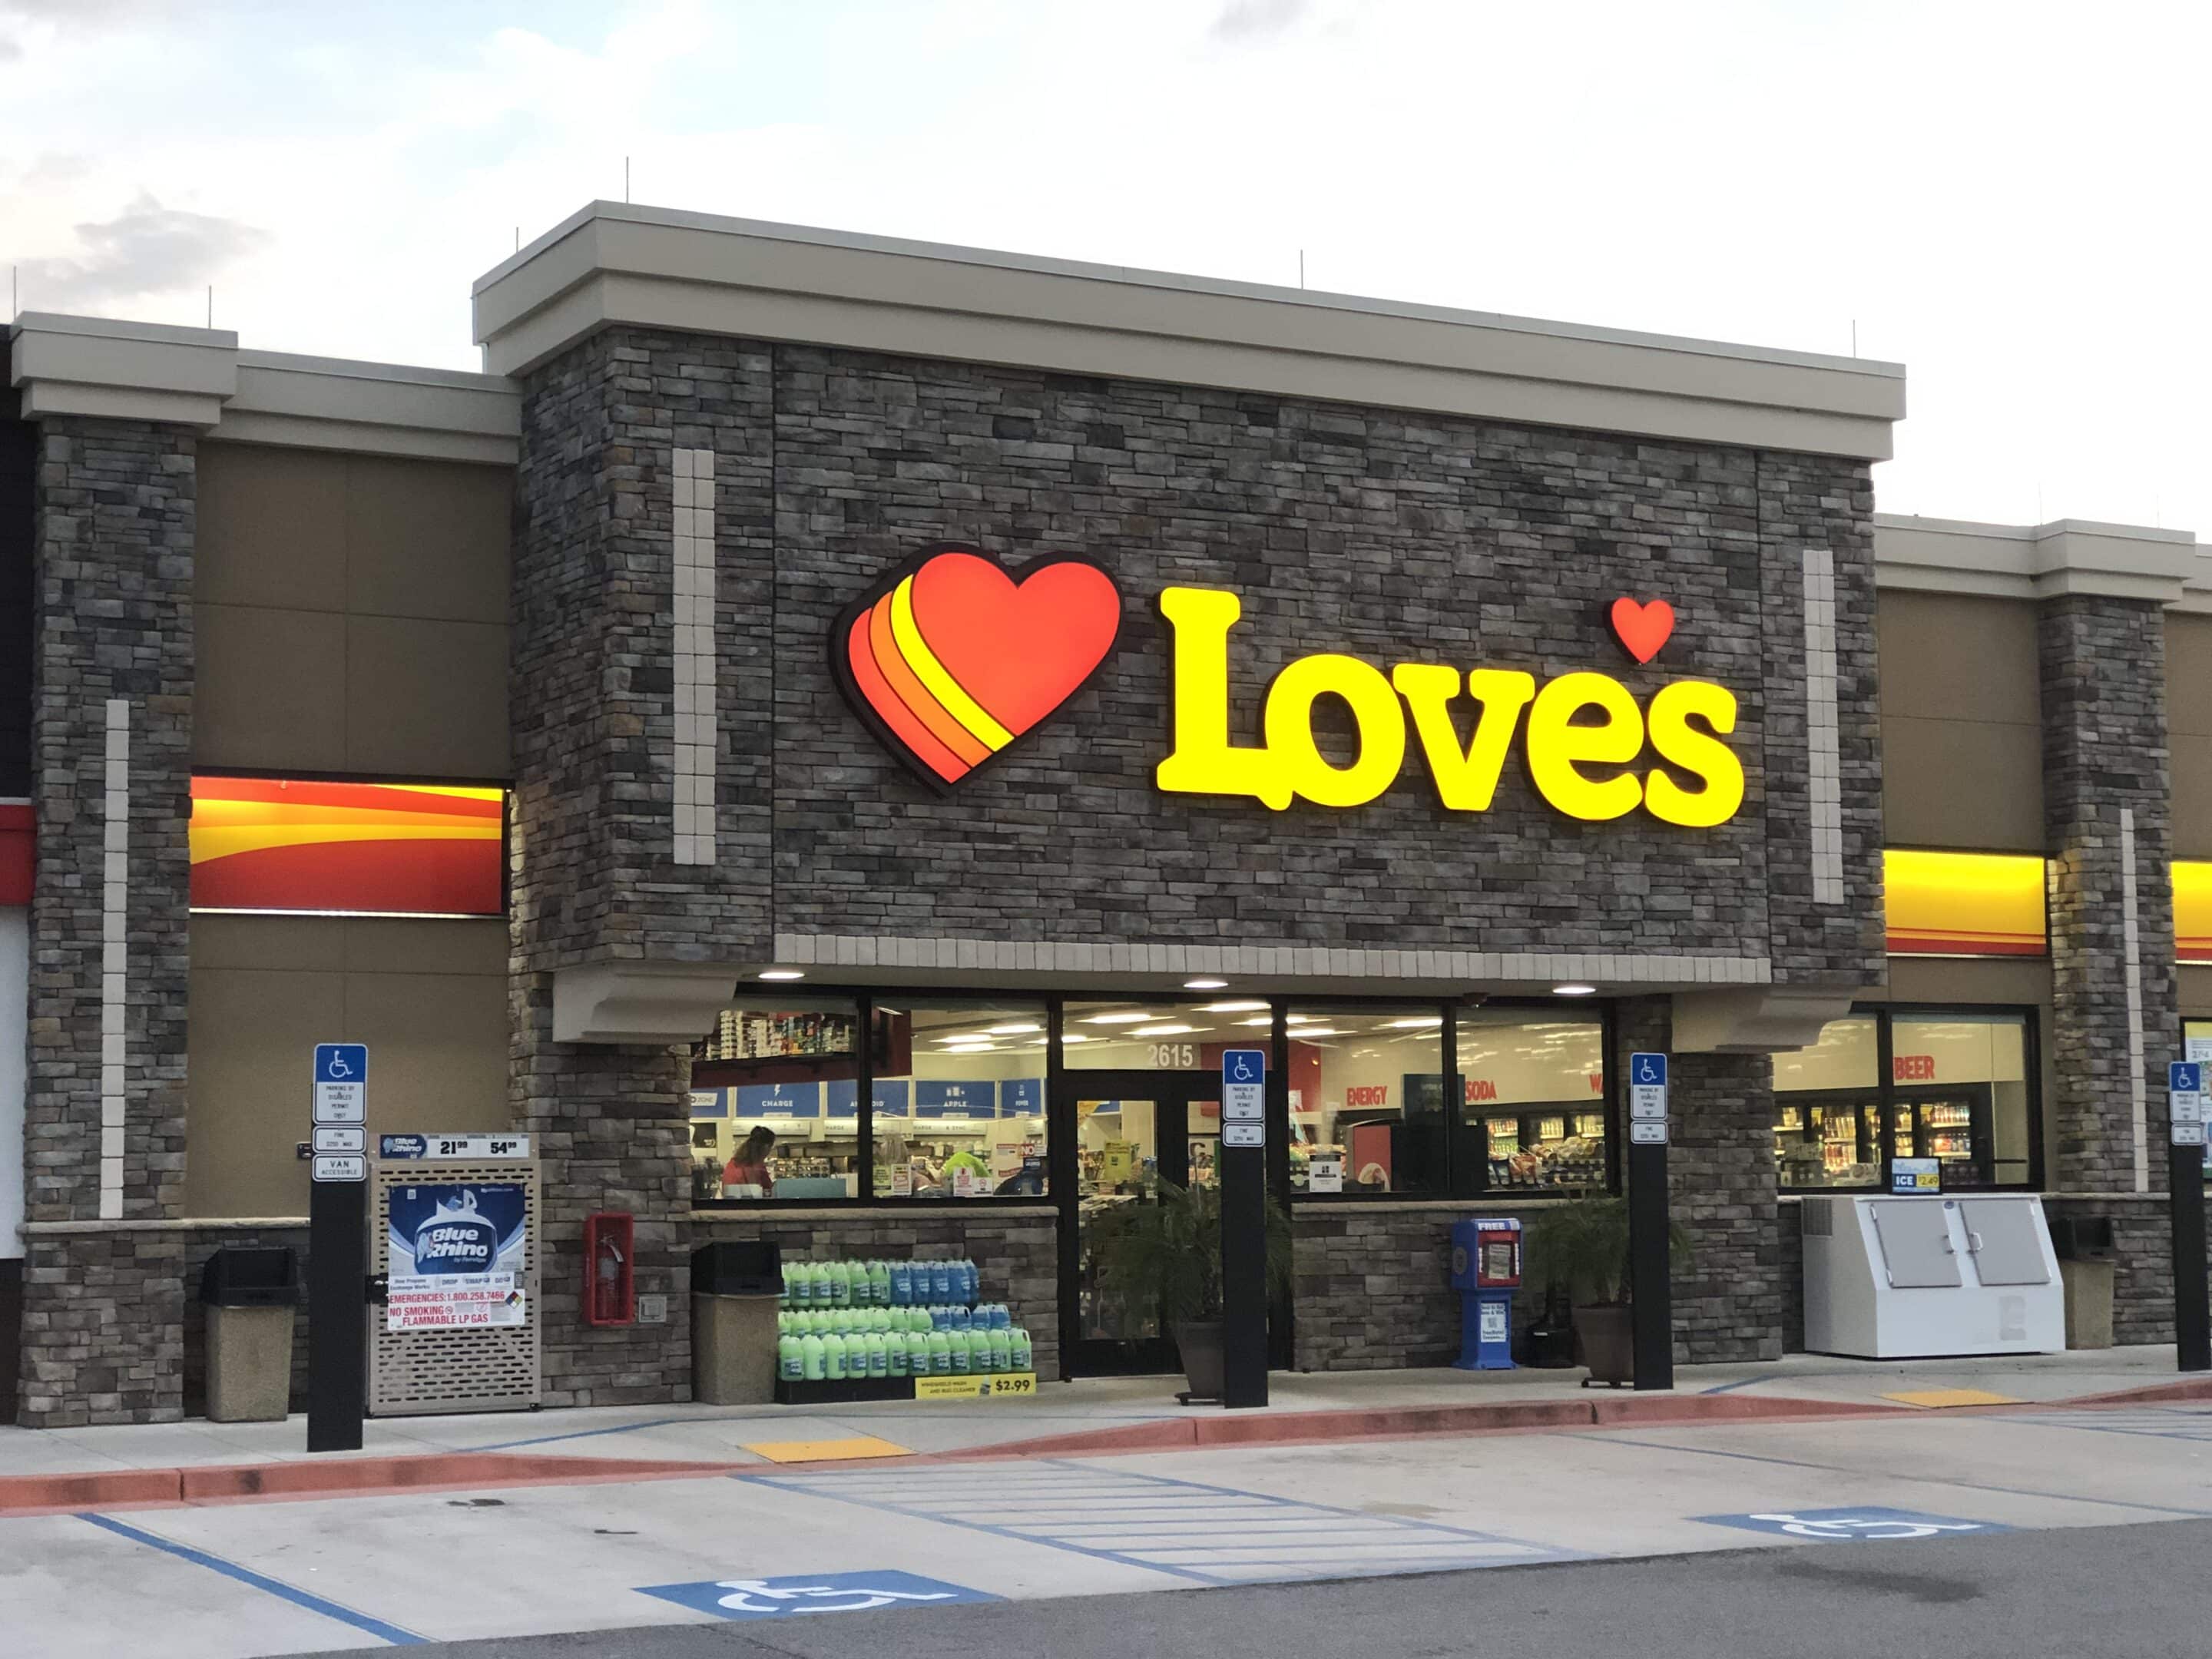 Loves is one of the best truck stops in the US.